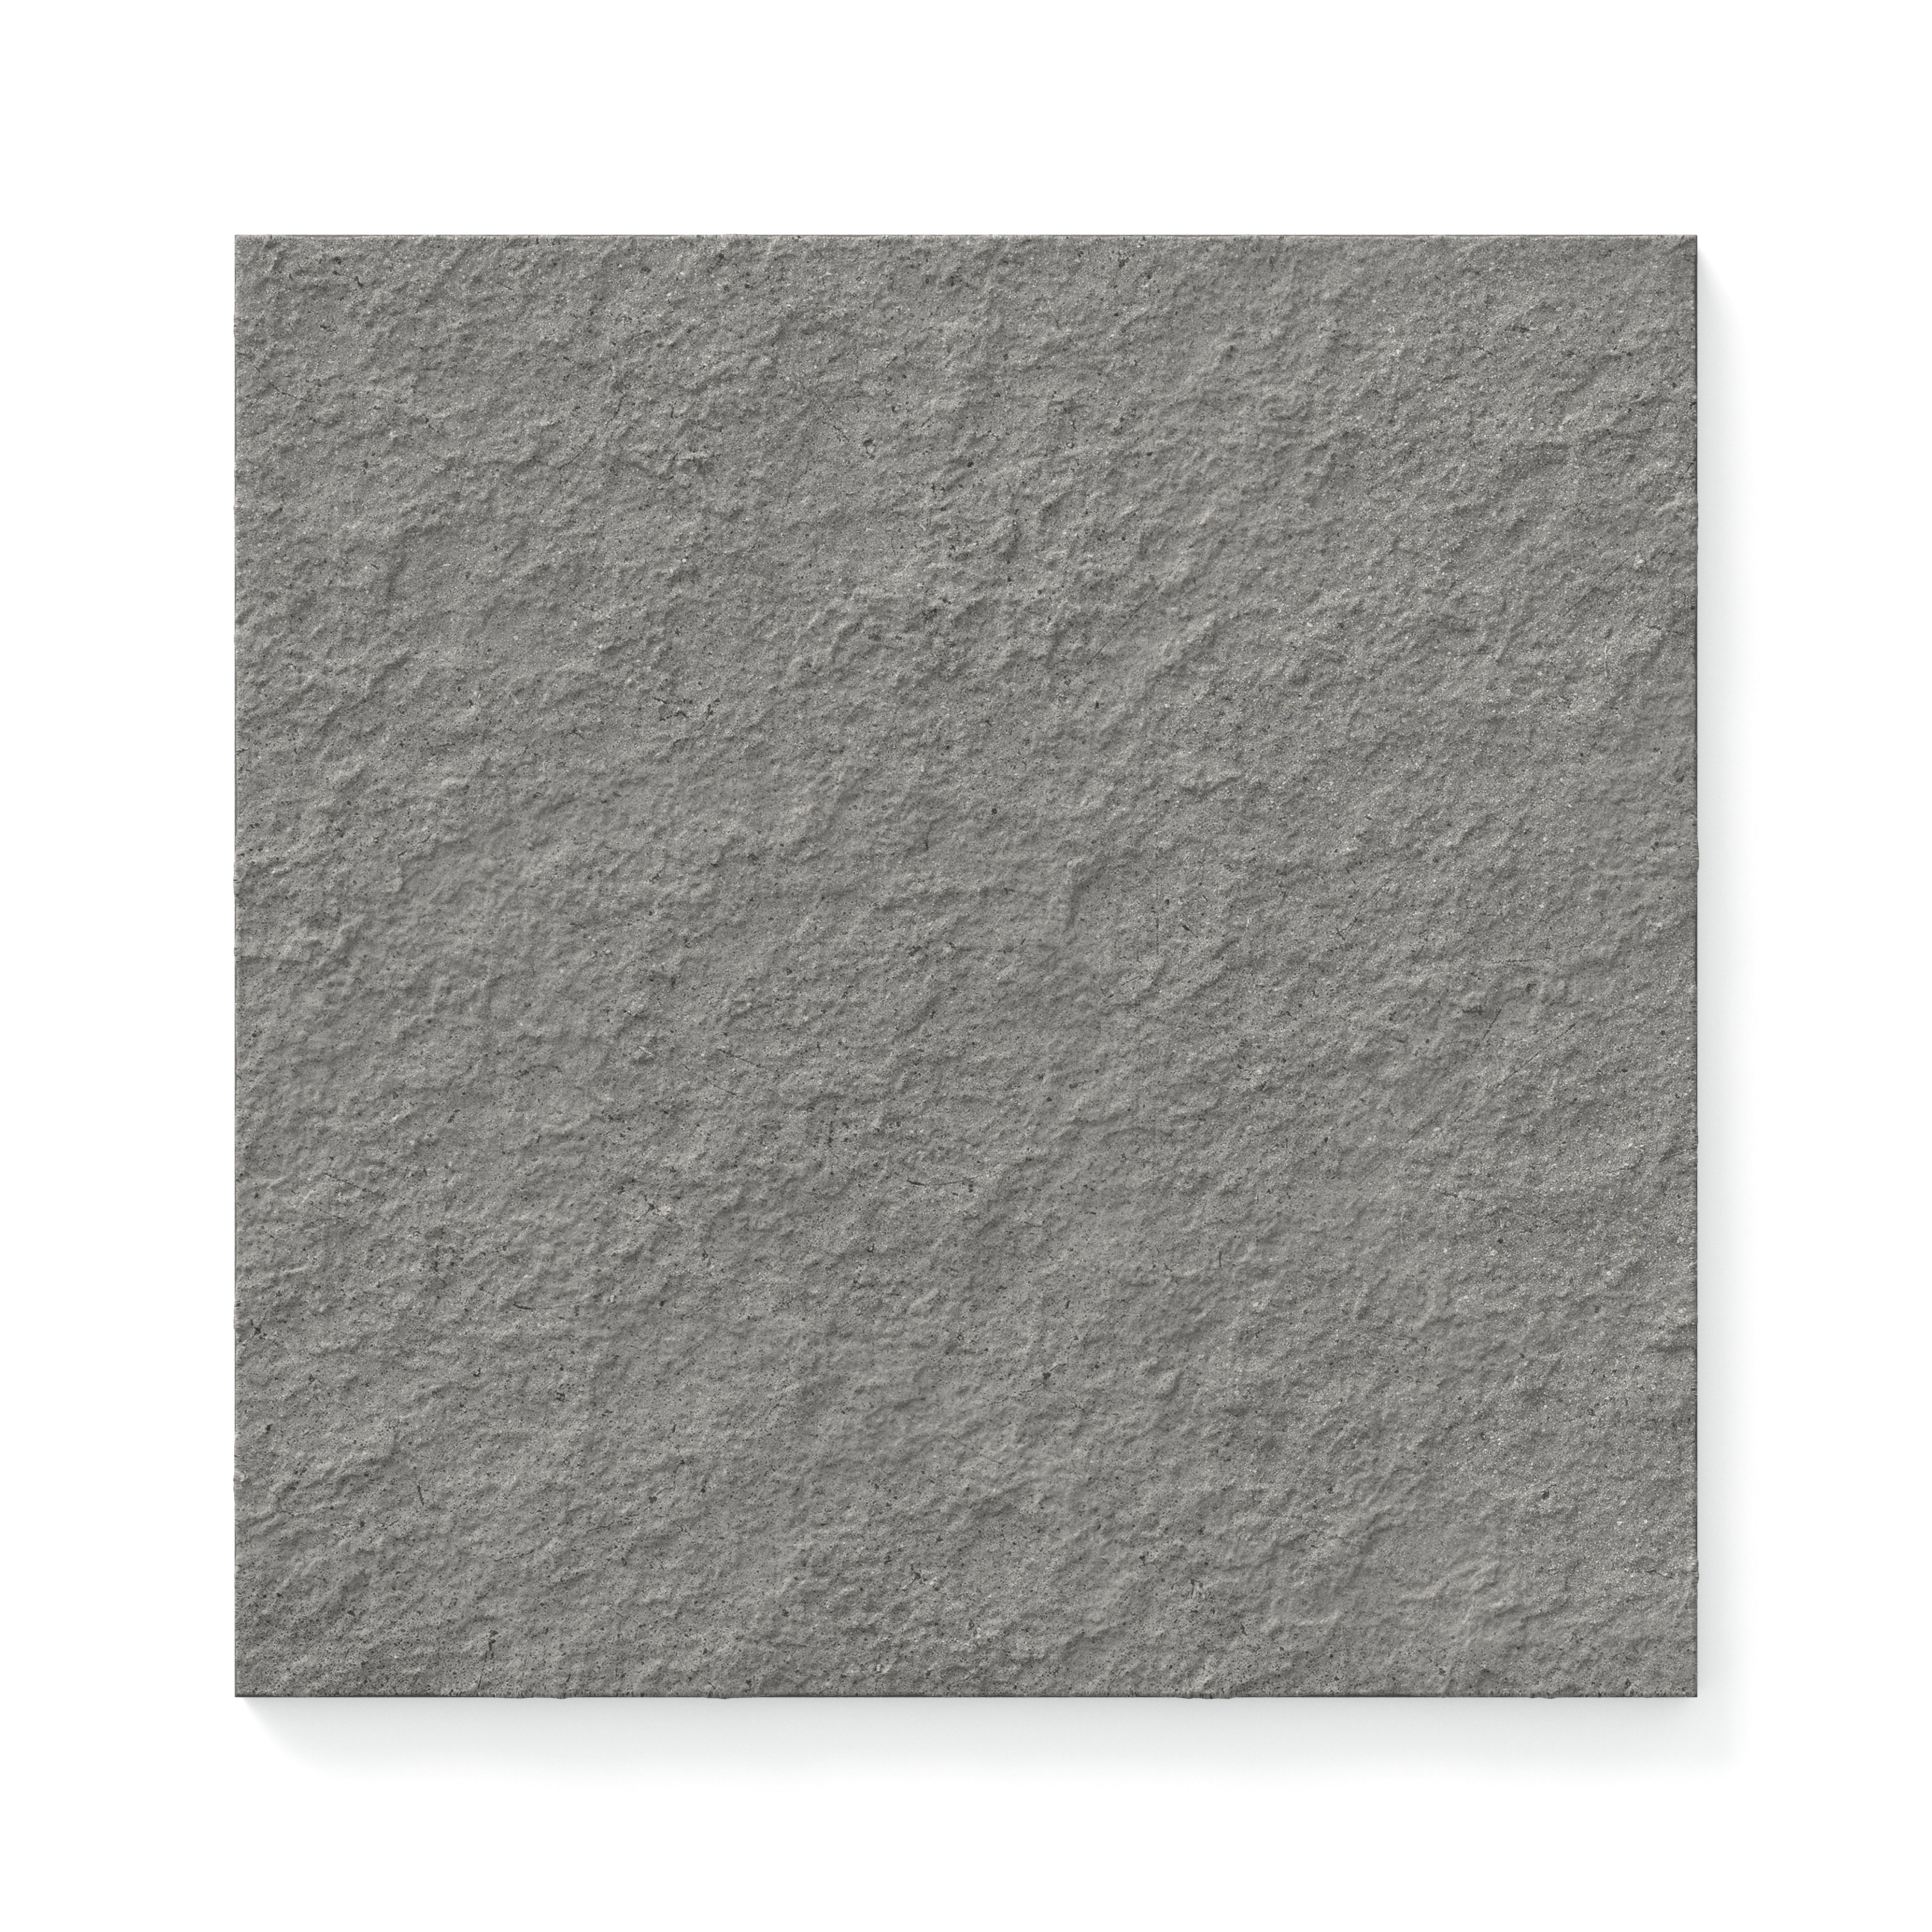 Palmer 12x12 Raw Porcelain Tile in Charcoal